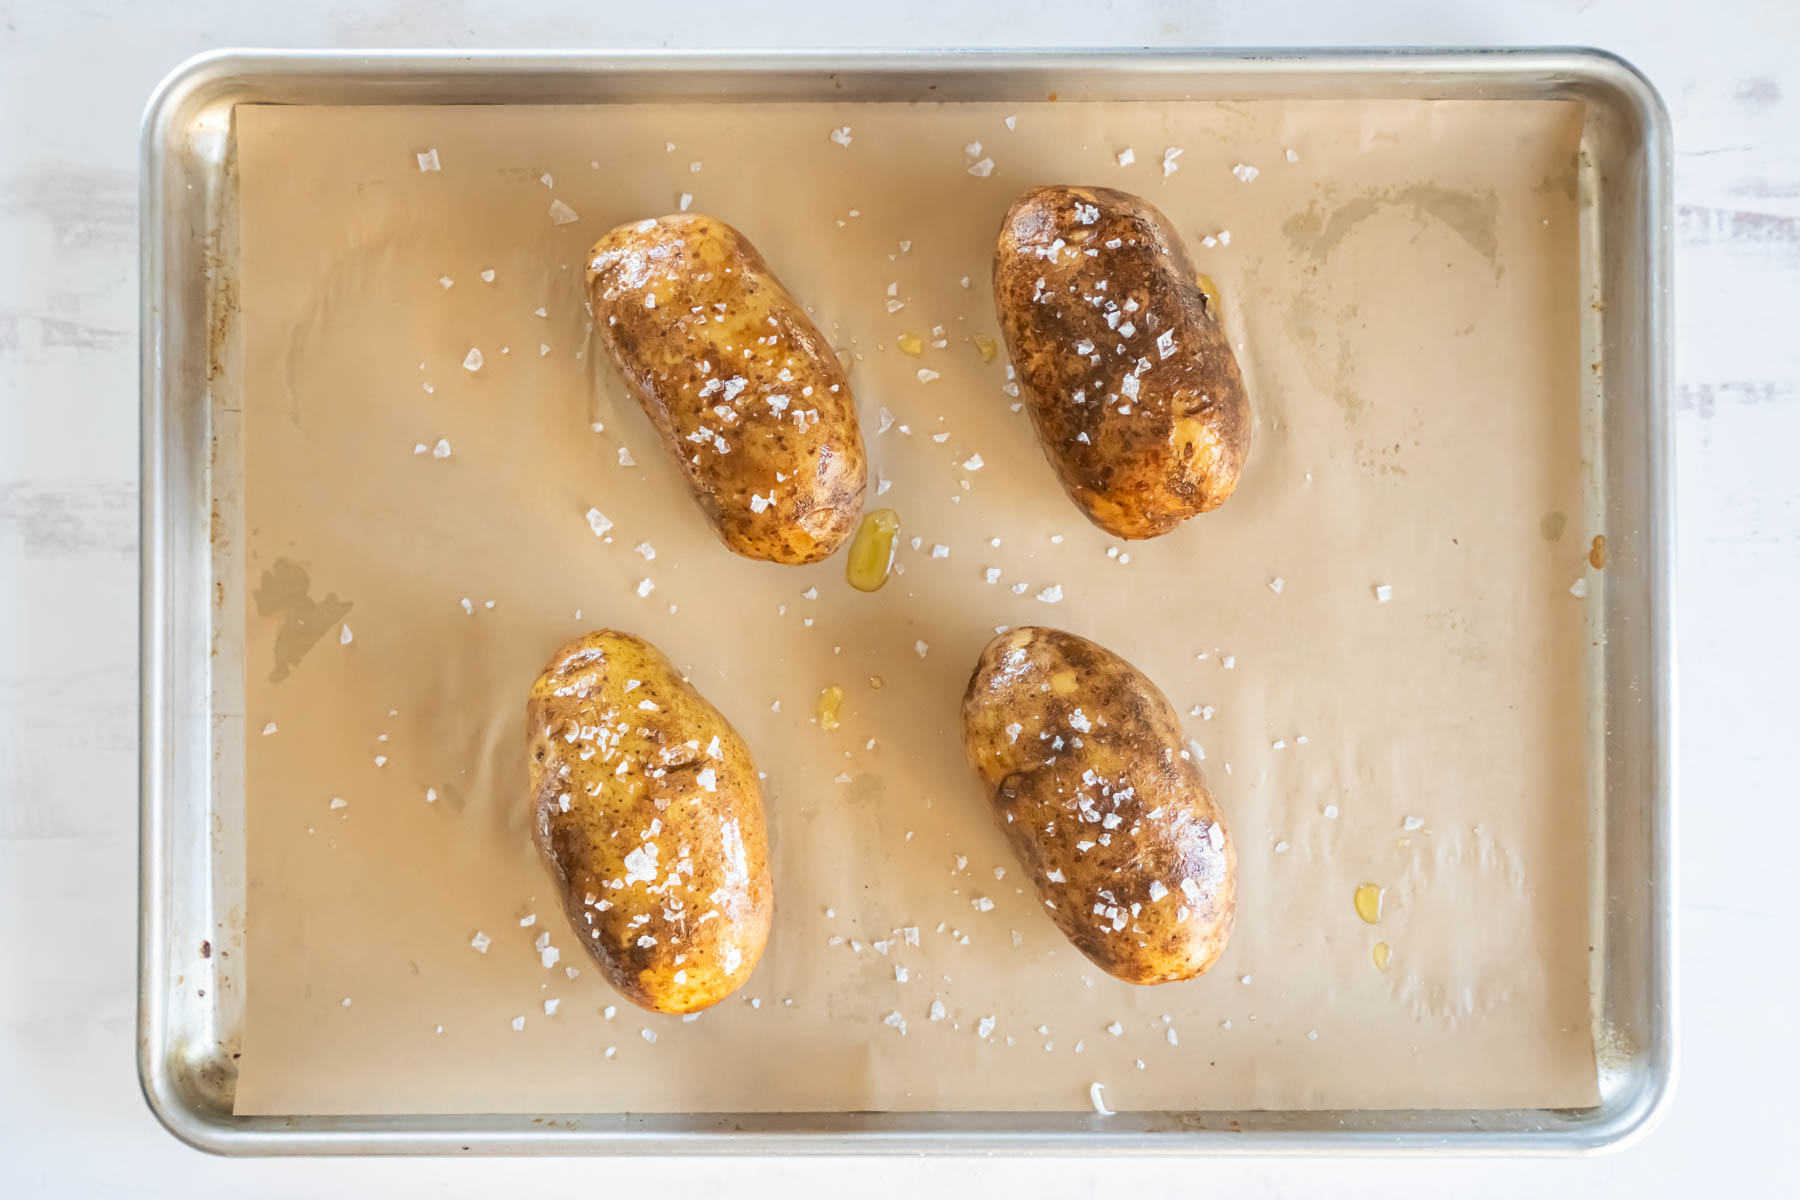 uncooked potatoes rubbed with olive oil and flaky sea salt on baking sheet